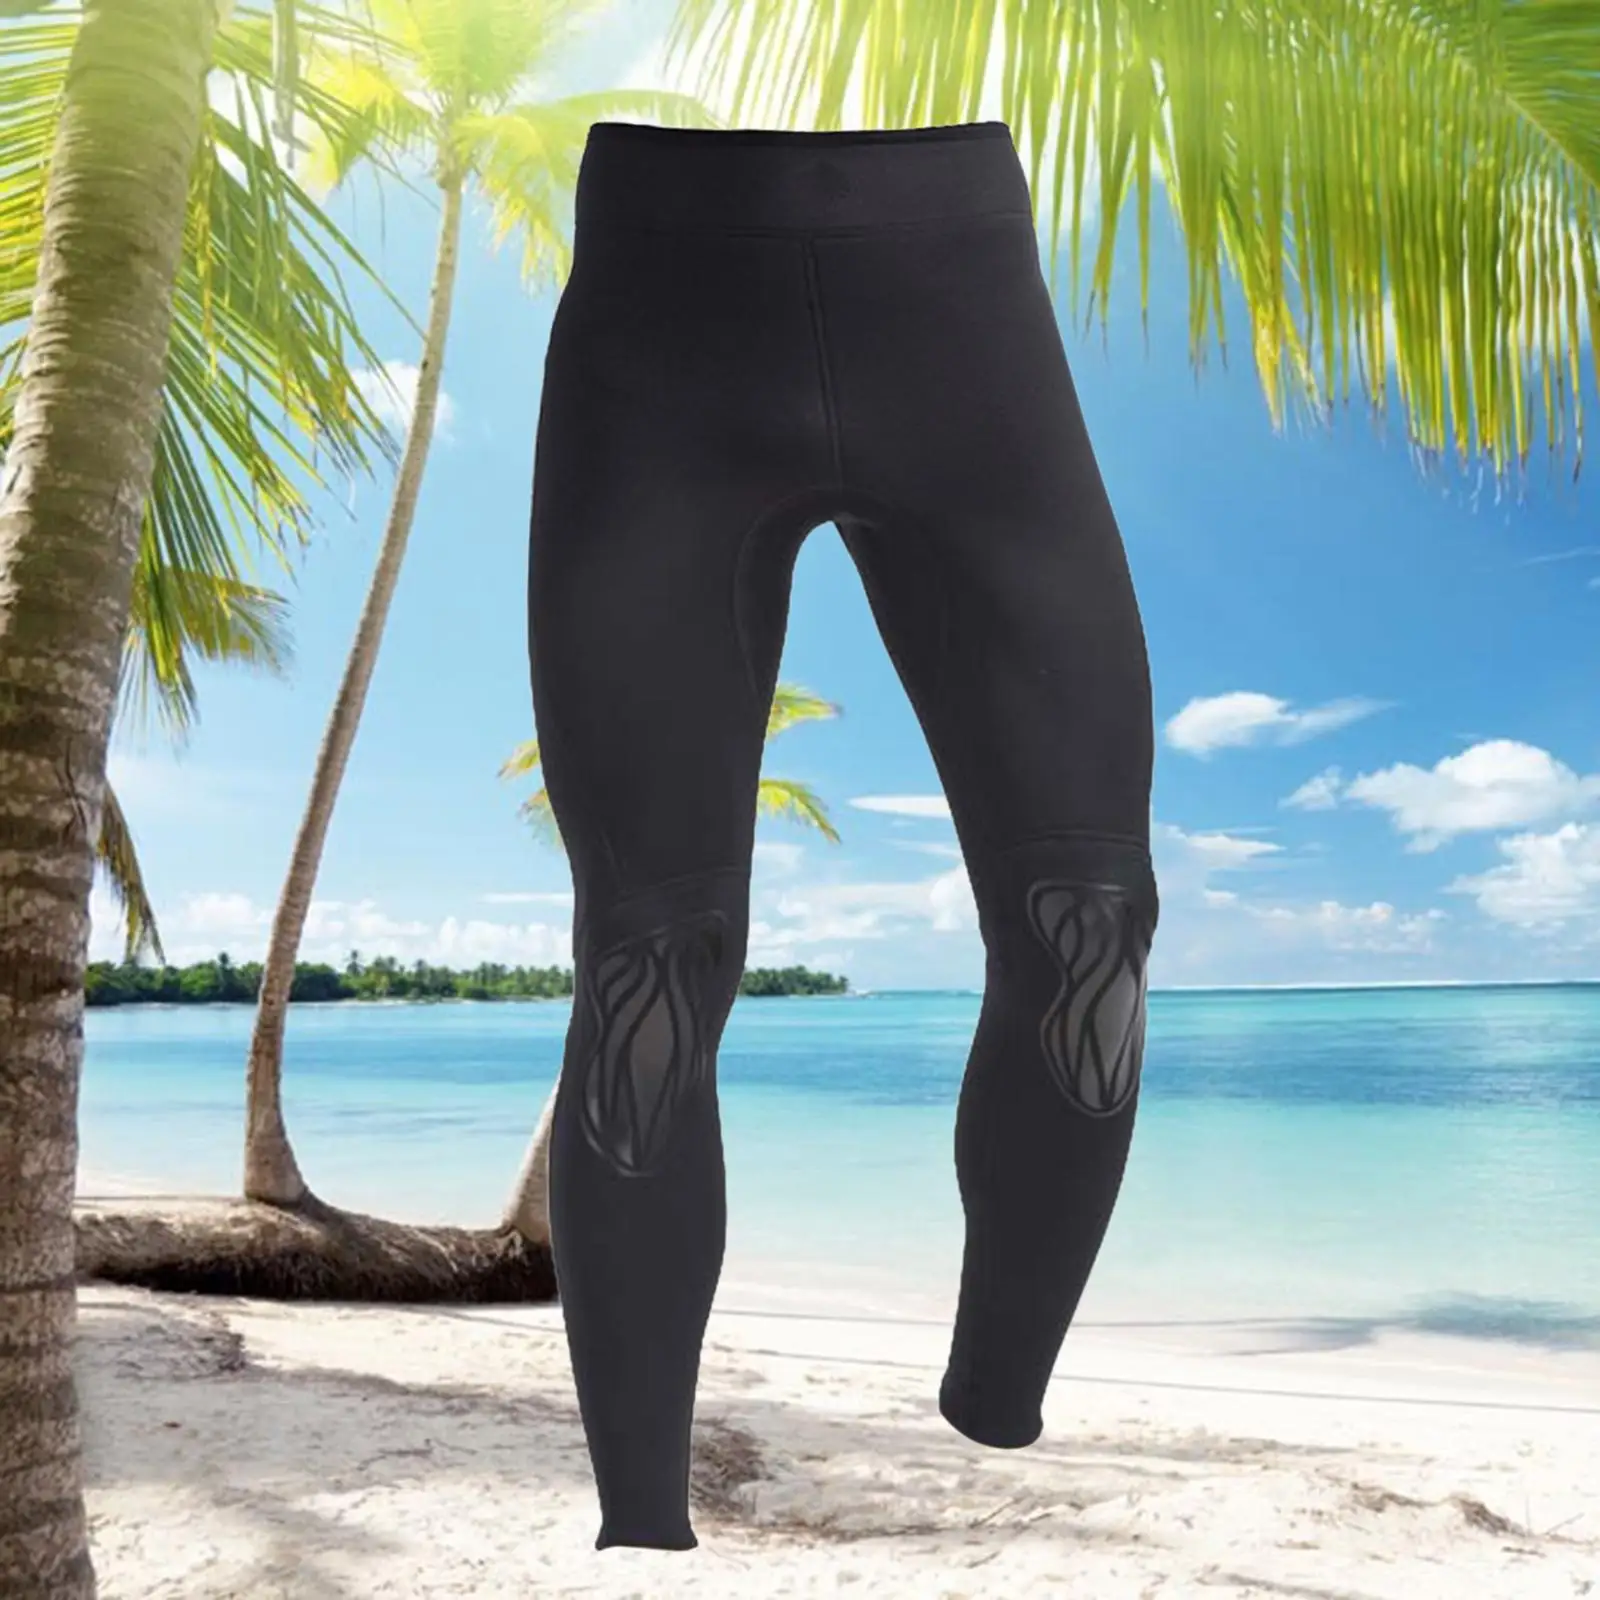 Adults Wetsuits Pants 3mm Neoprene Tight High Waist Trousers for Snorkeling